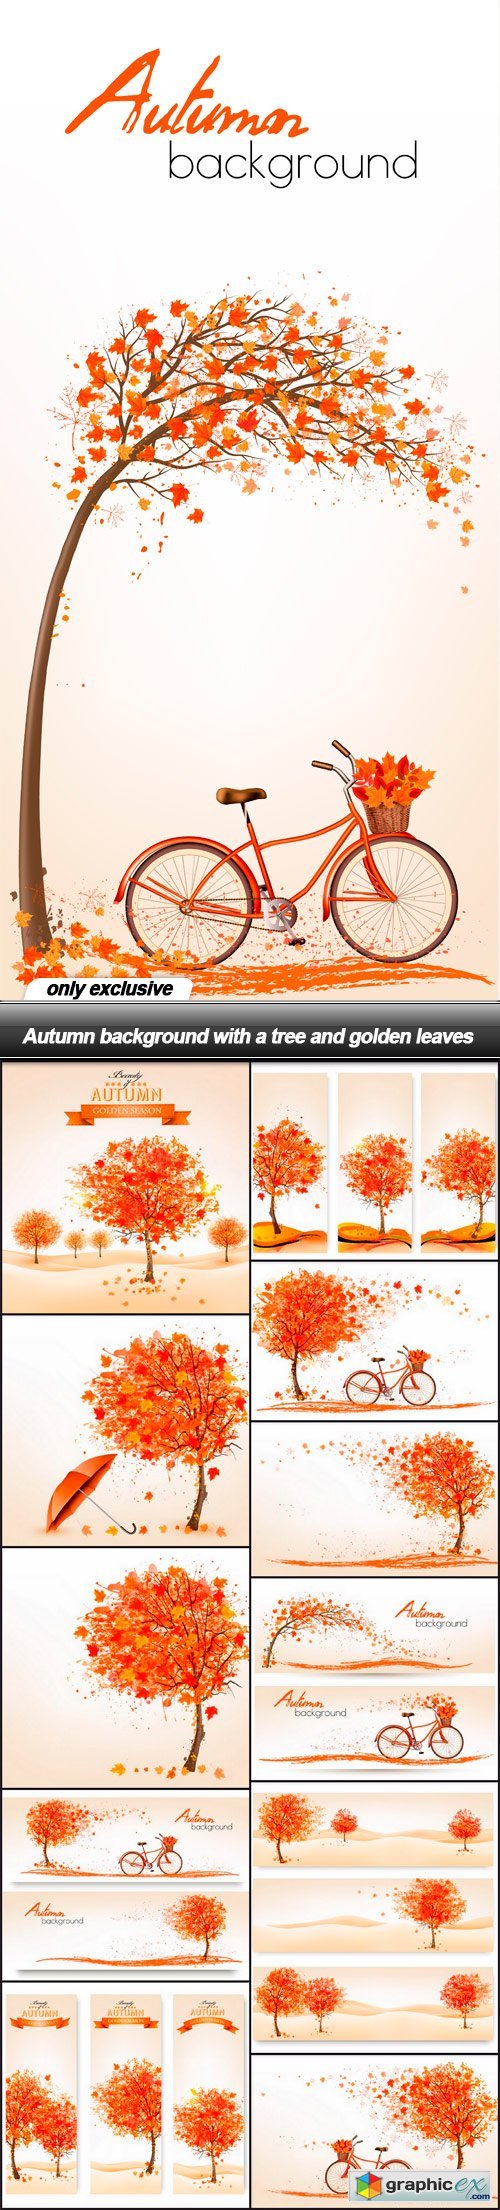 Autumn background with a tree and golden leaves - 12 EPS